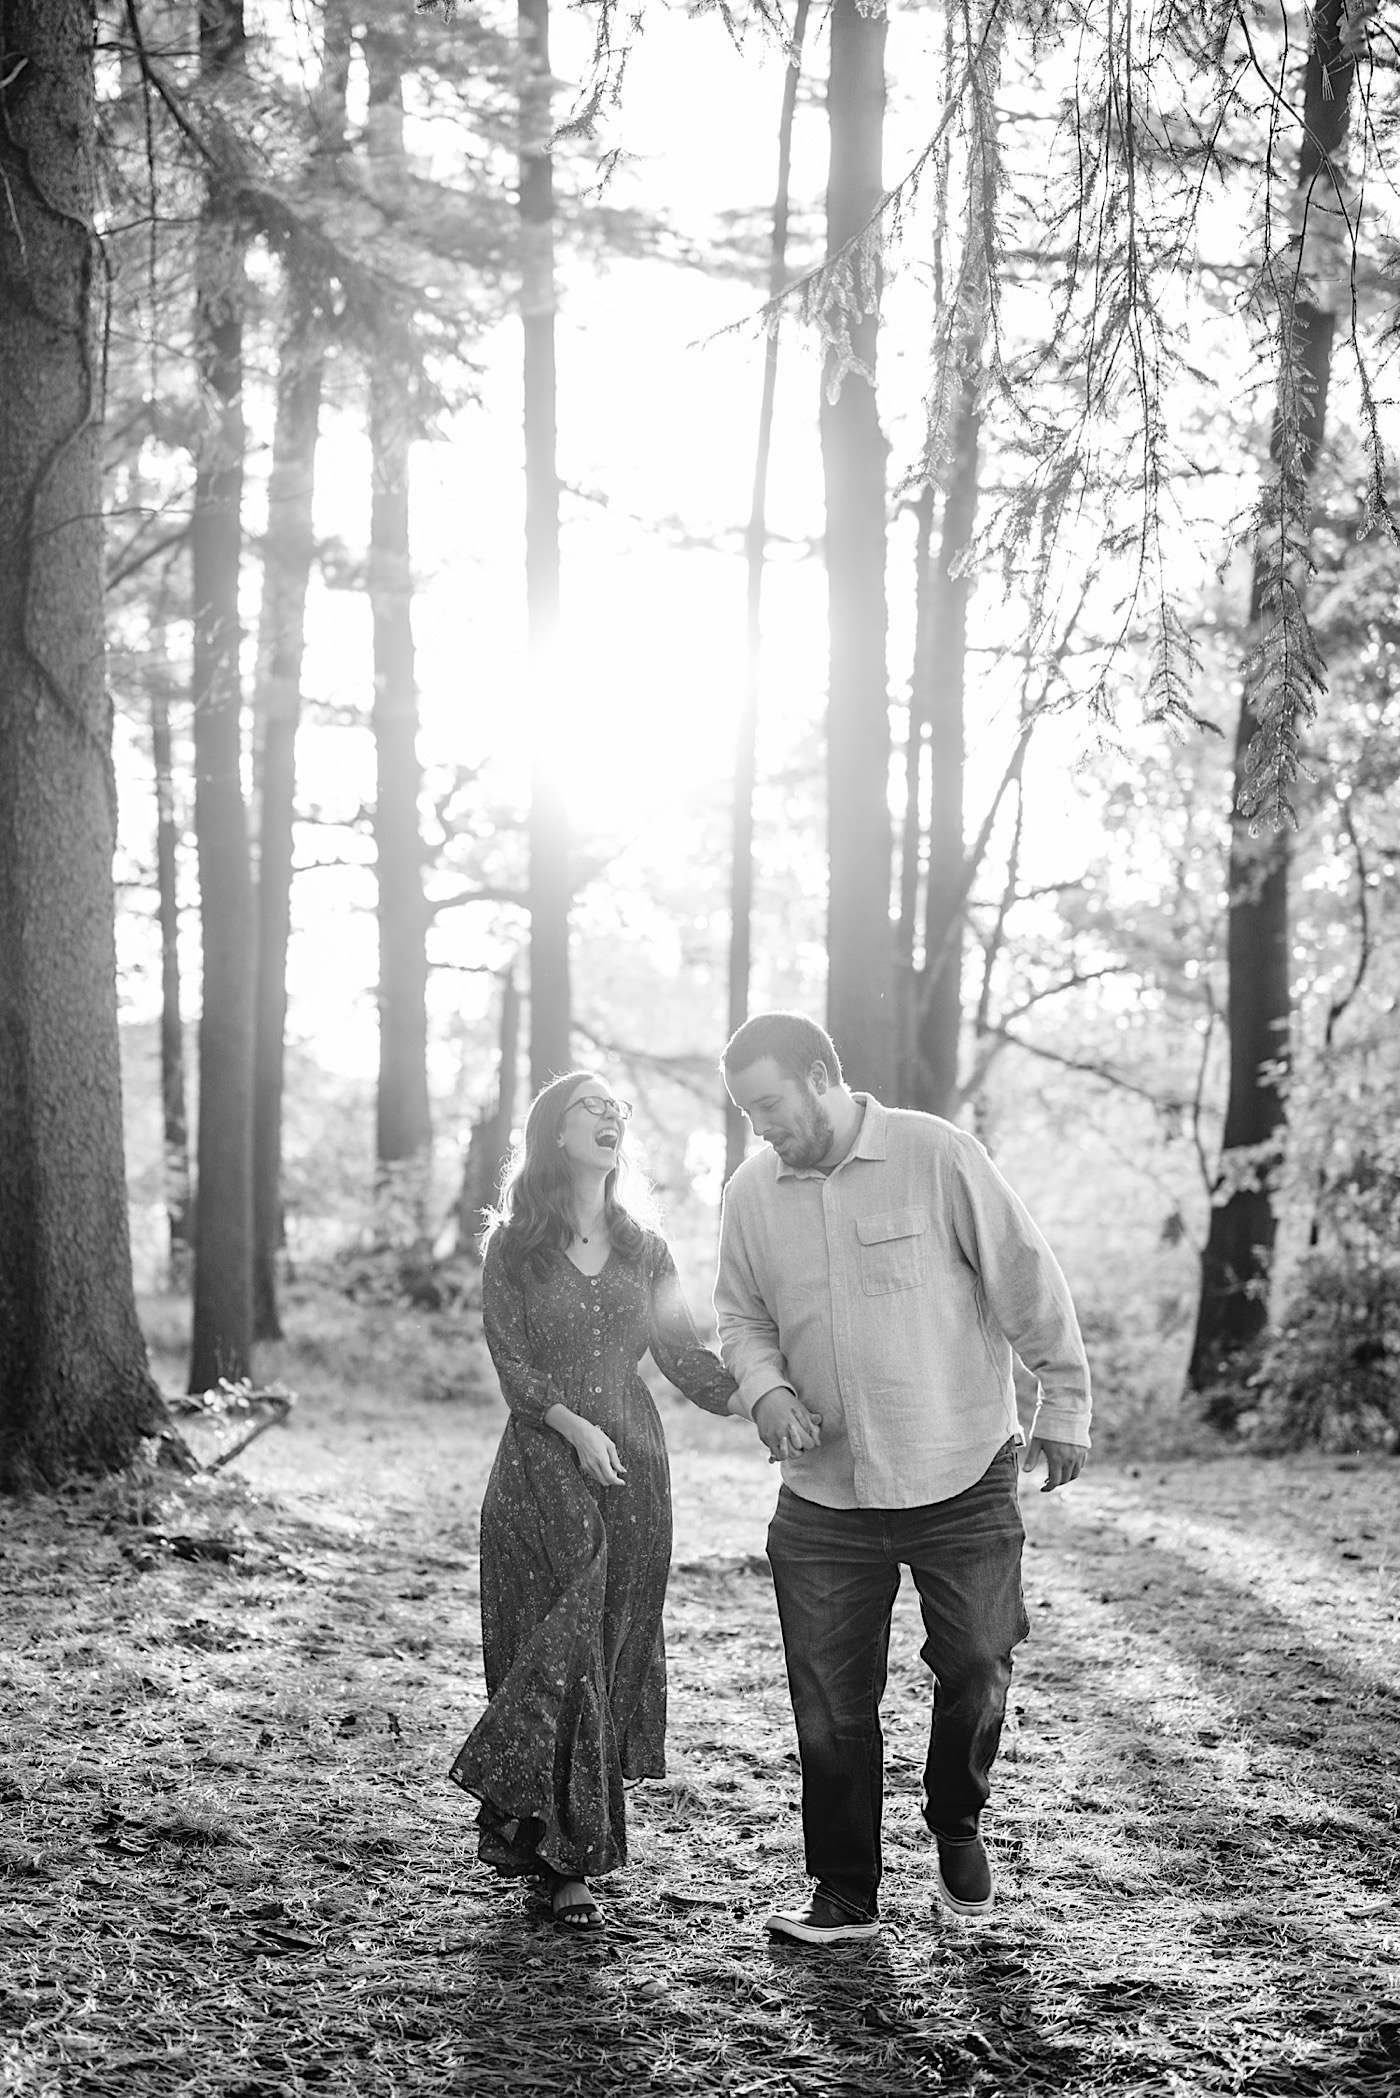 Southern Maryland Wedding Photographer, Kyra Gustwick, fall engagement session ideas, woodsy photo location in Maryland, Loch Raven Reservoir Engagement Session, Baltimore MD Photographer